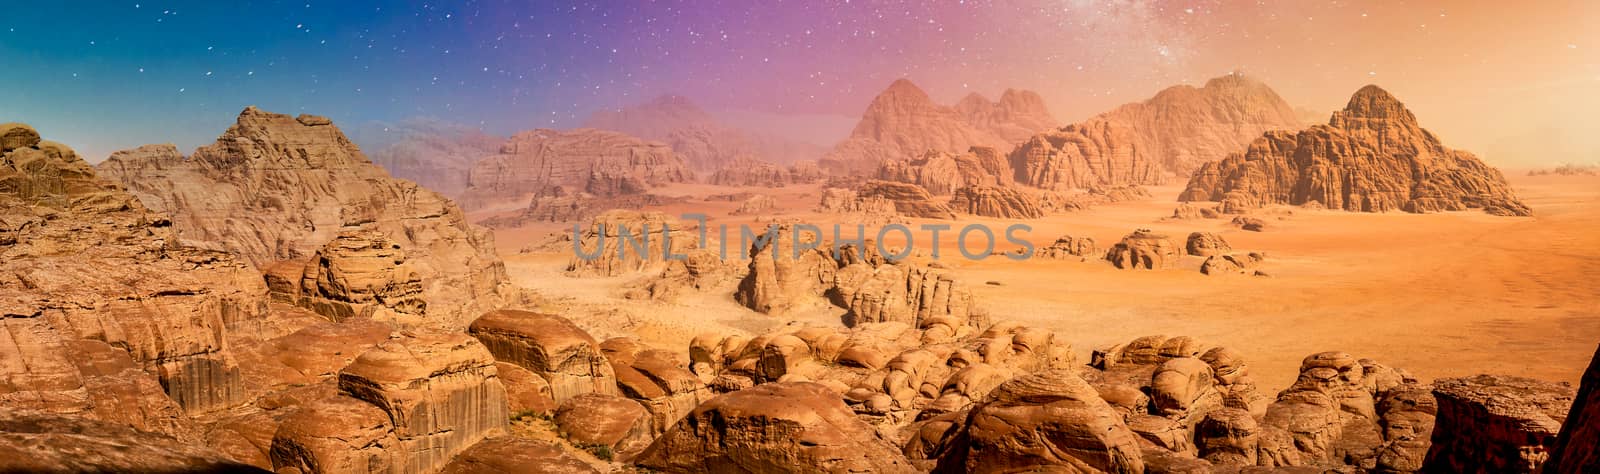 Desert and rocks on extraterrestrial or alien planet in the universe with view on space and galaxy by kb79